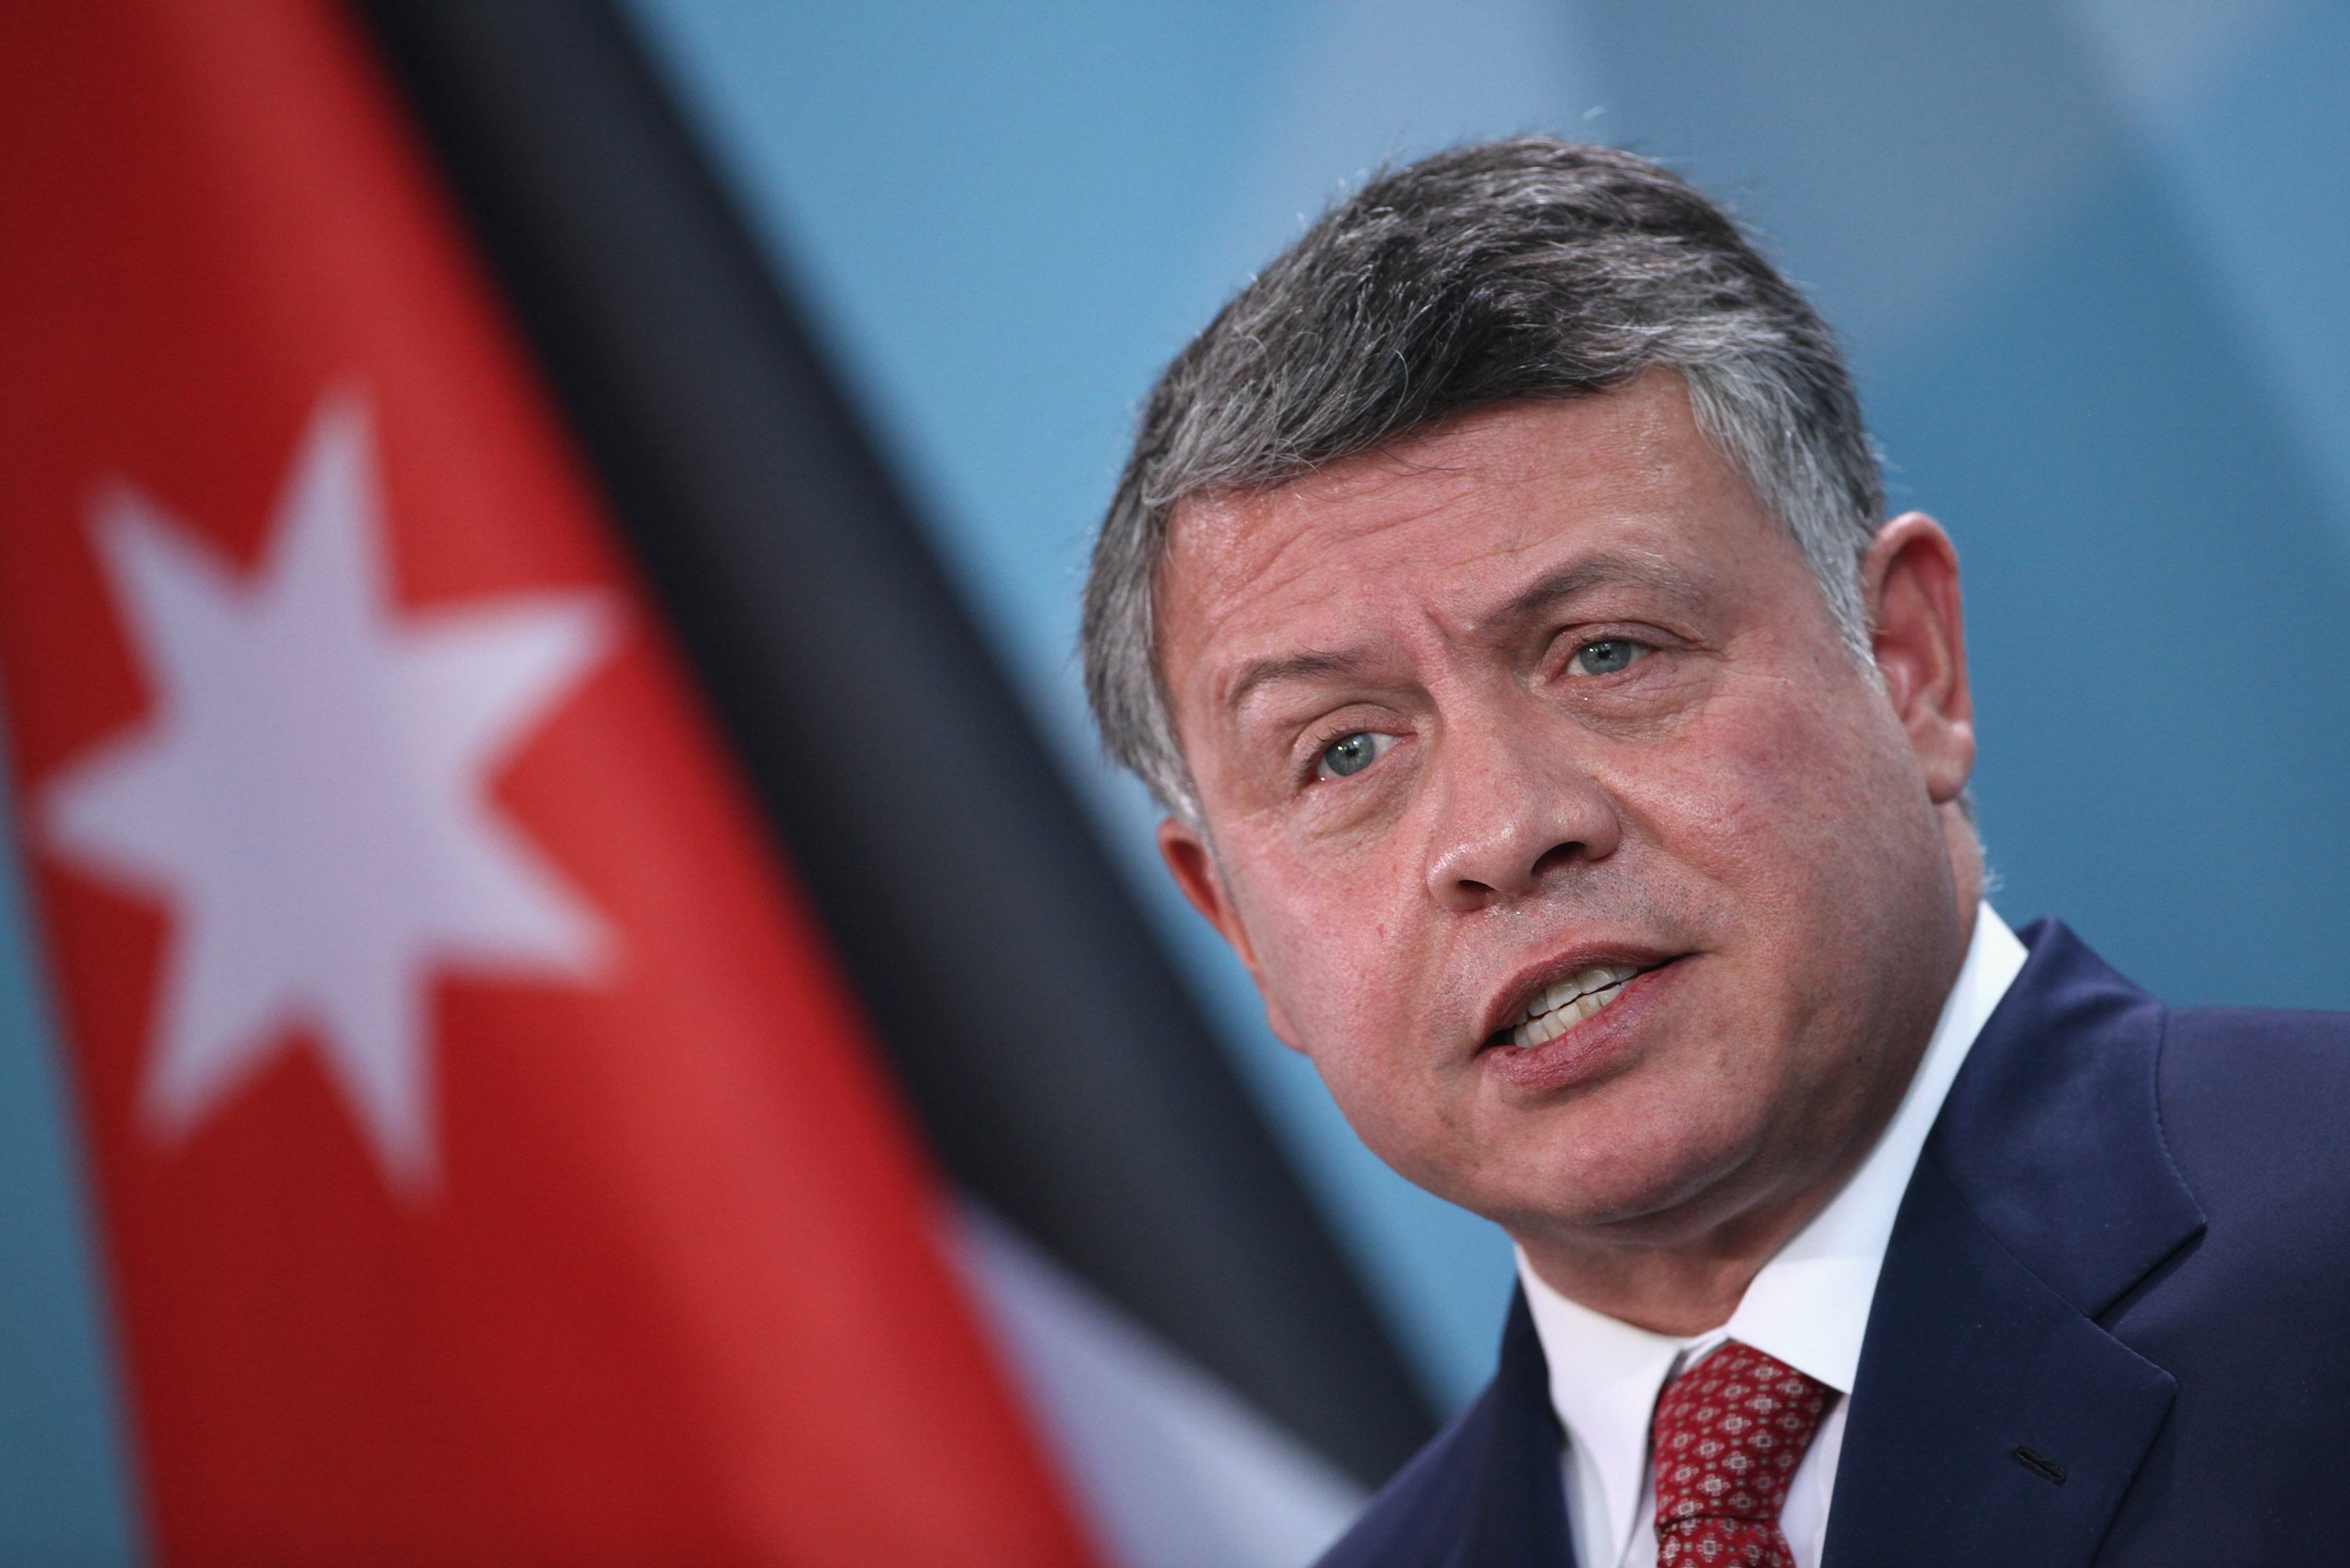 BERLIN, GERMANY - NOVEMBER 29: King Abdullah II of Jordanspeaks to the media following talks with German Chancellor Angela Merkel at the Chancellery on November 29, 2011 in Berlin, Germany. The two leaders discussed, among other topics, the current situation in Syria. (Photo by Sean Gallup/Getty Images)